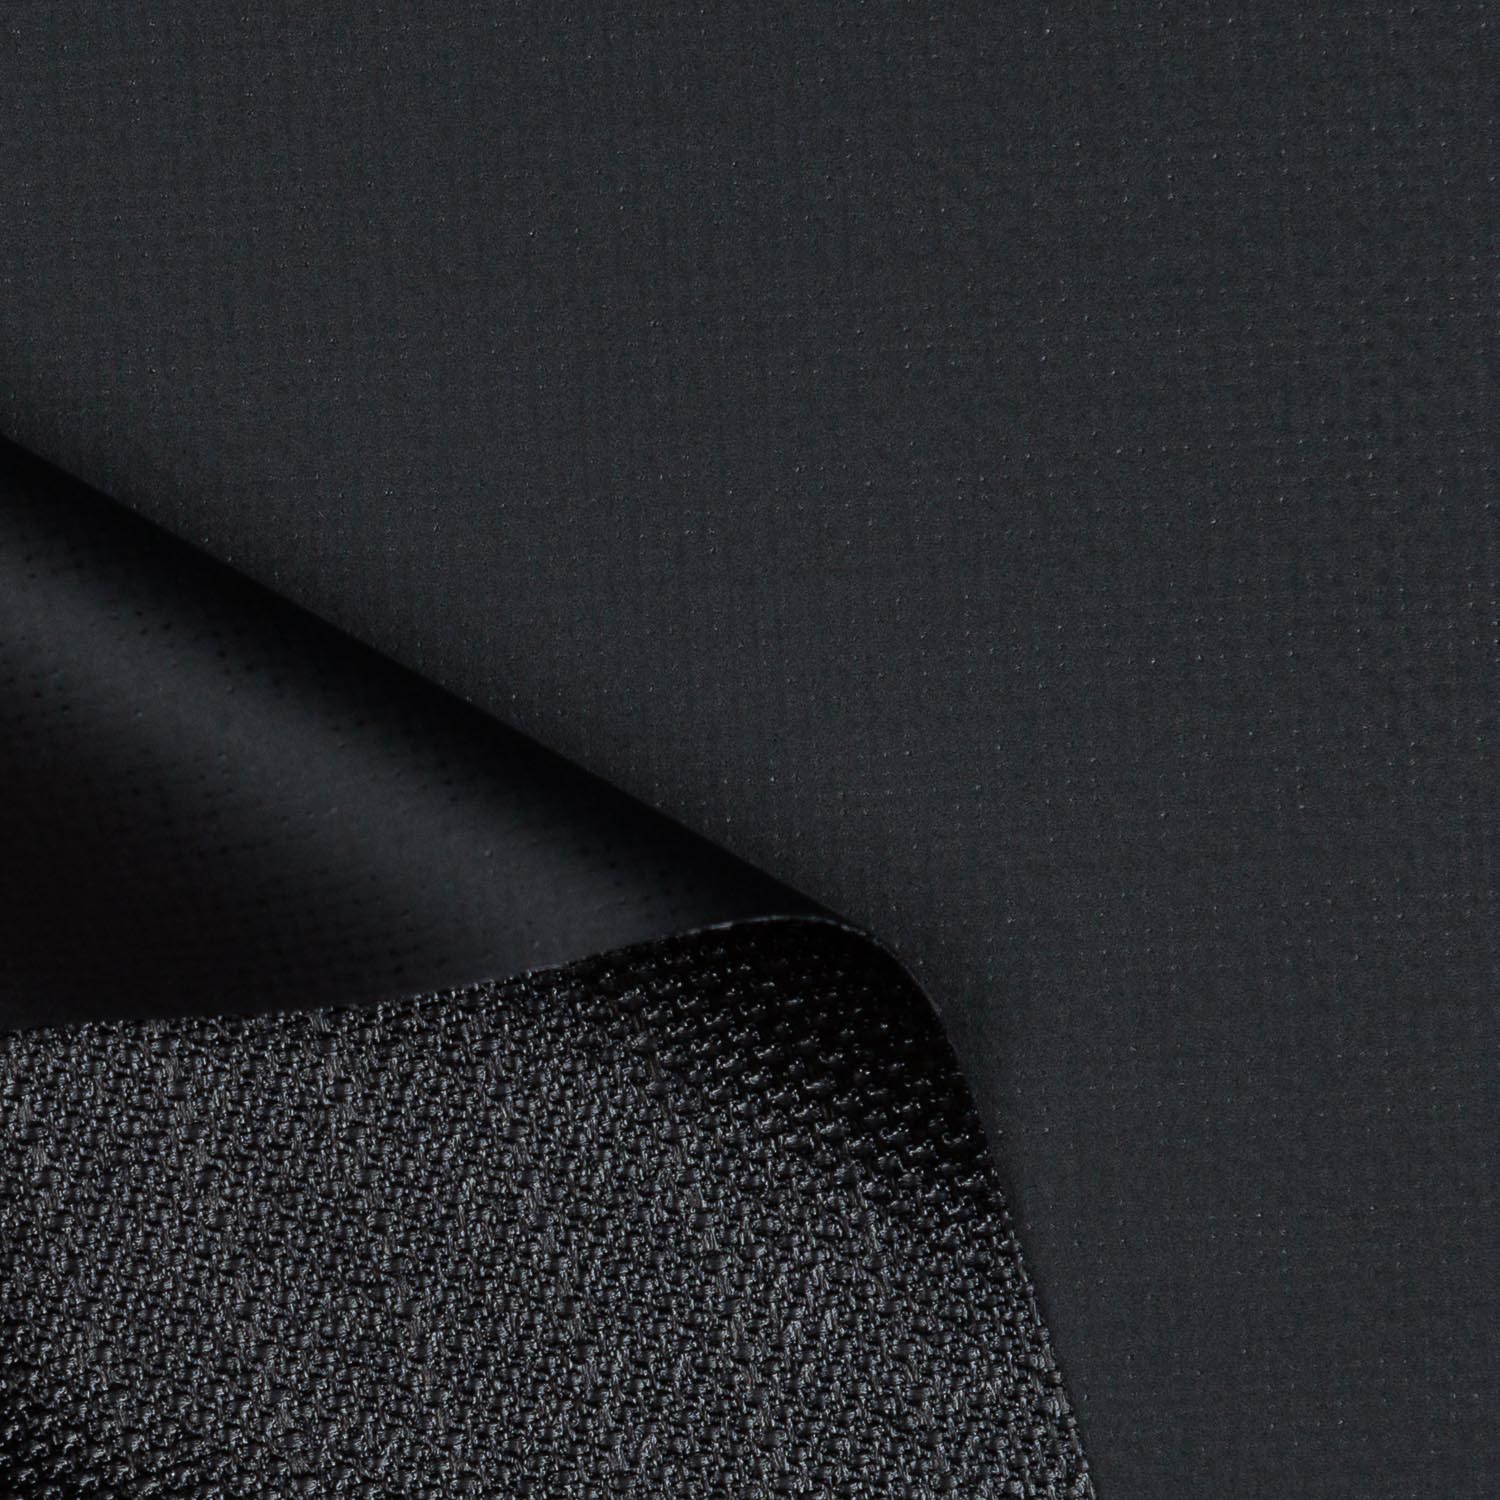 18 oz. Vinyl Coated Polyester Ripstop Fabric - TVF